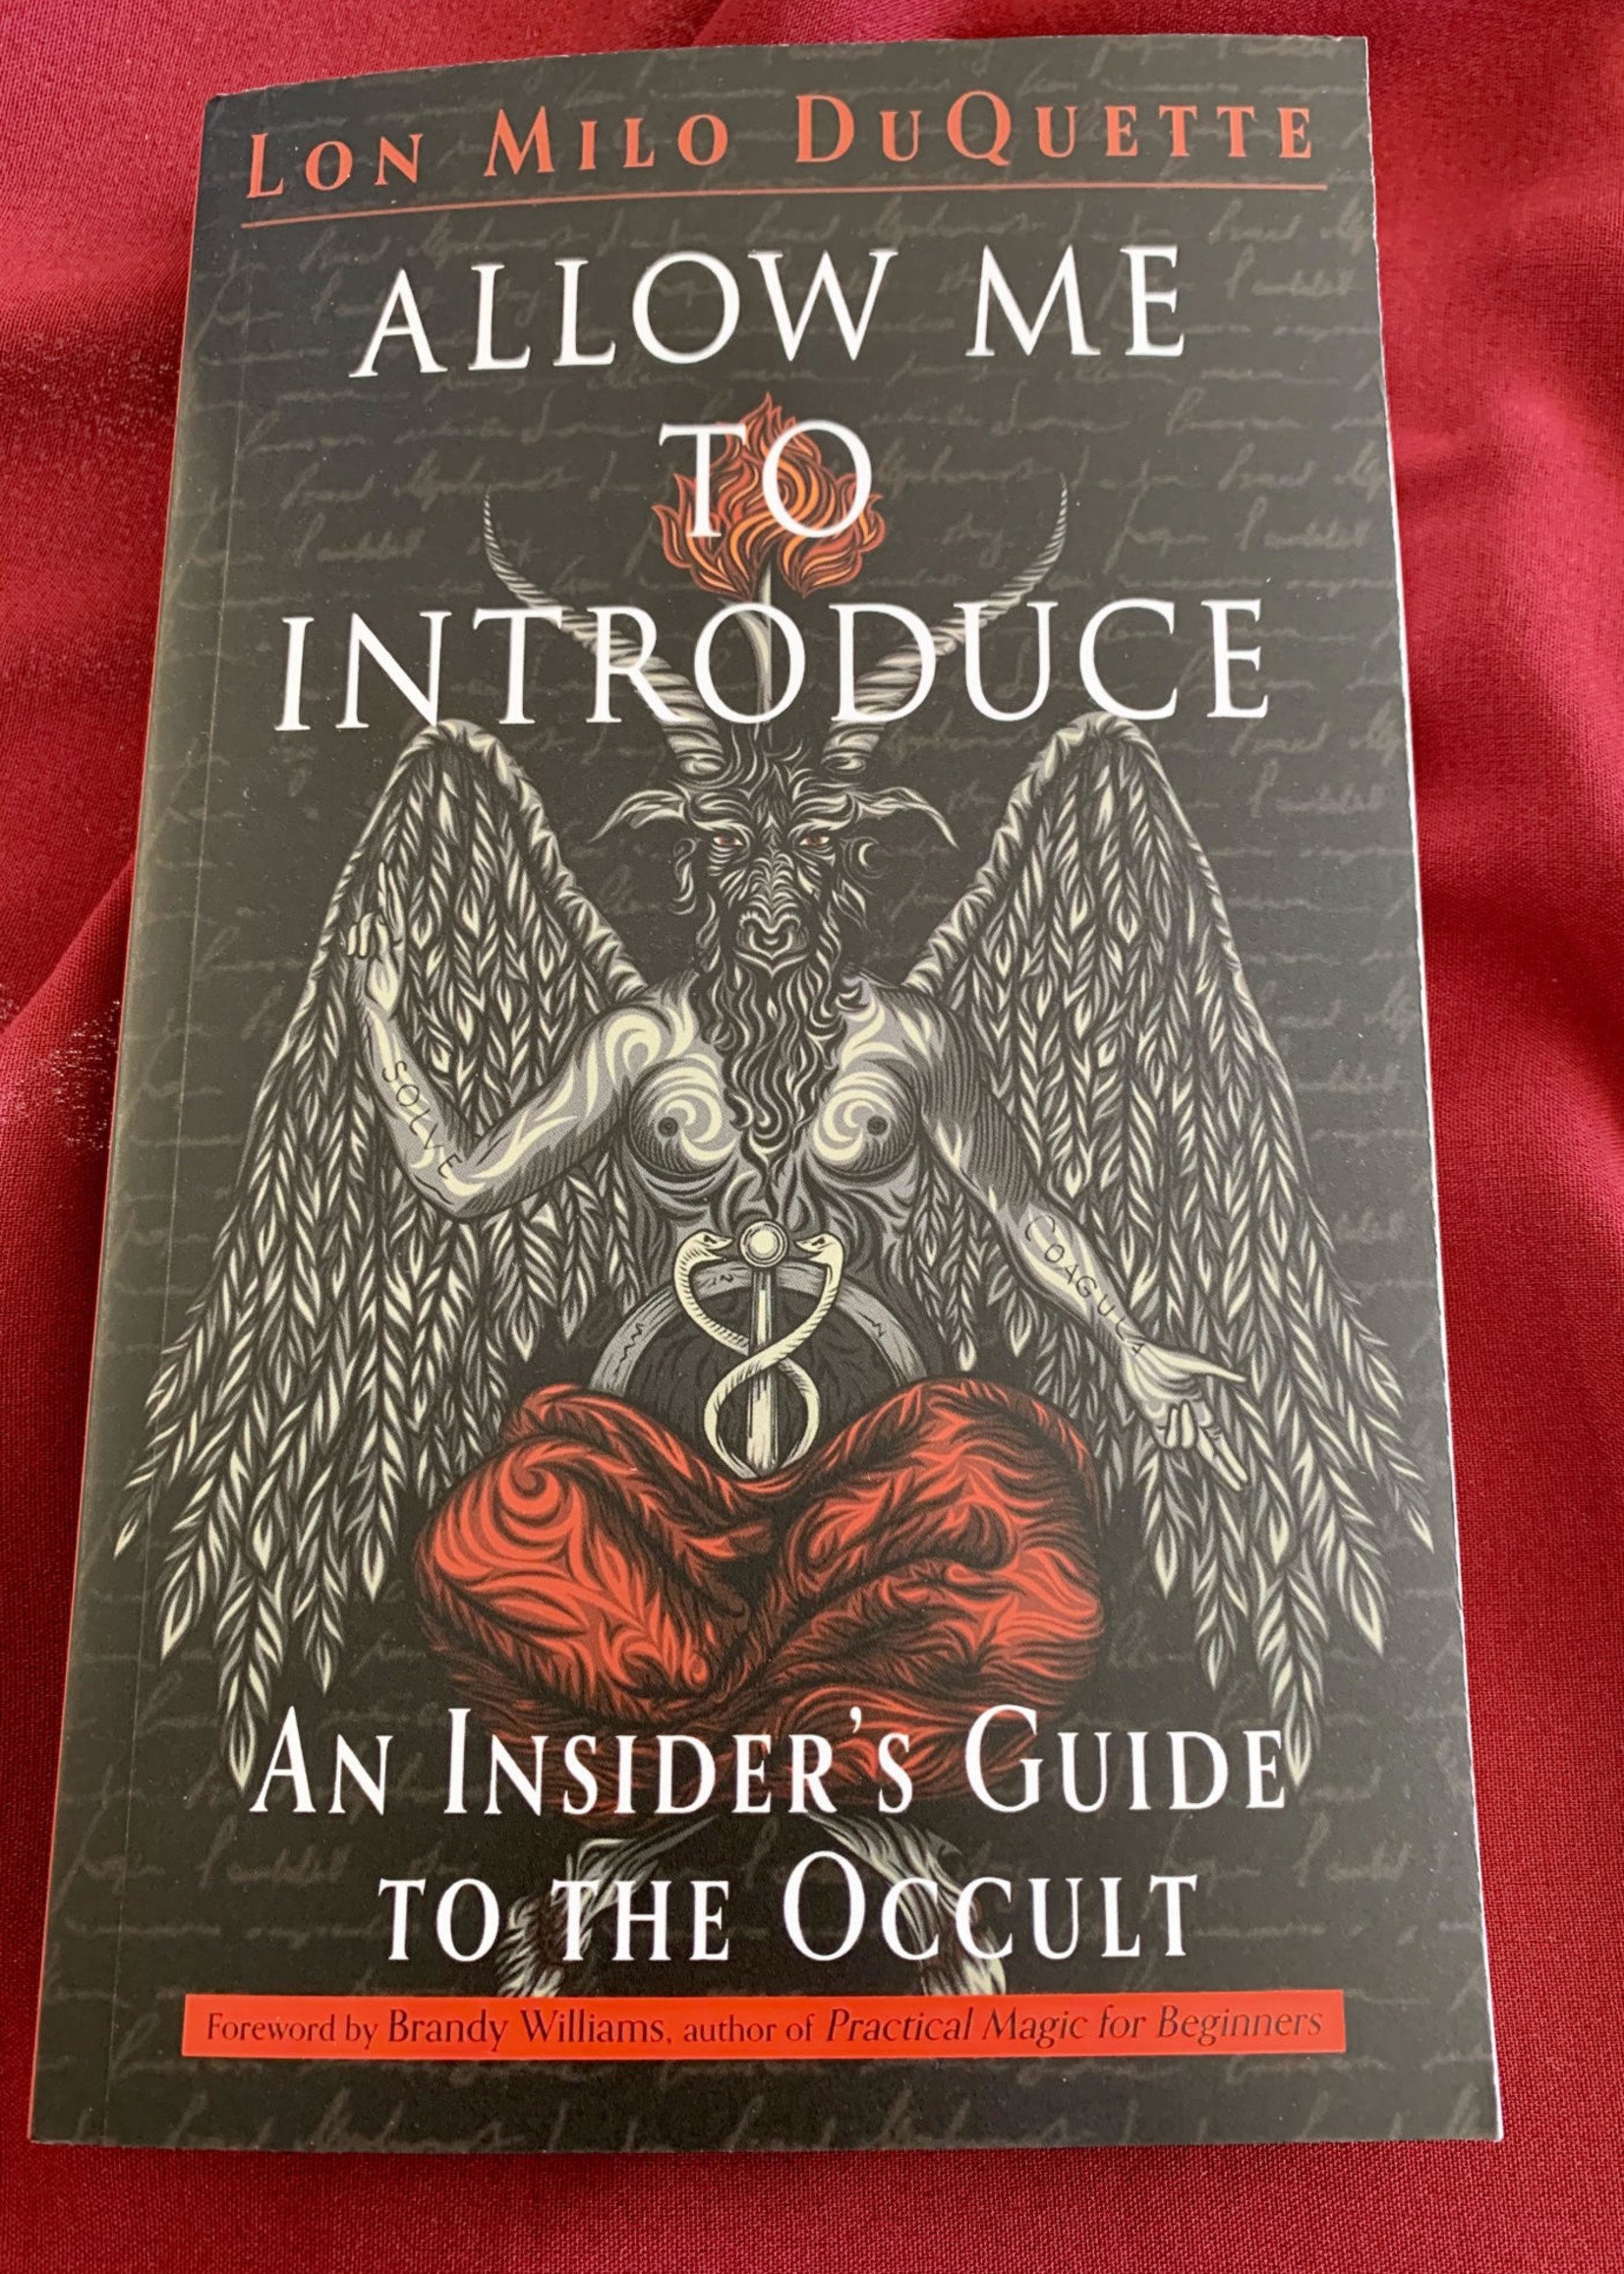 Allow Me to Introduce An Insider's Guide to the Occult